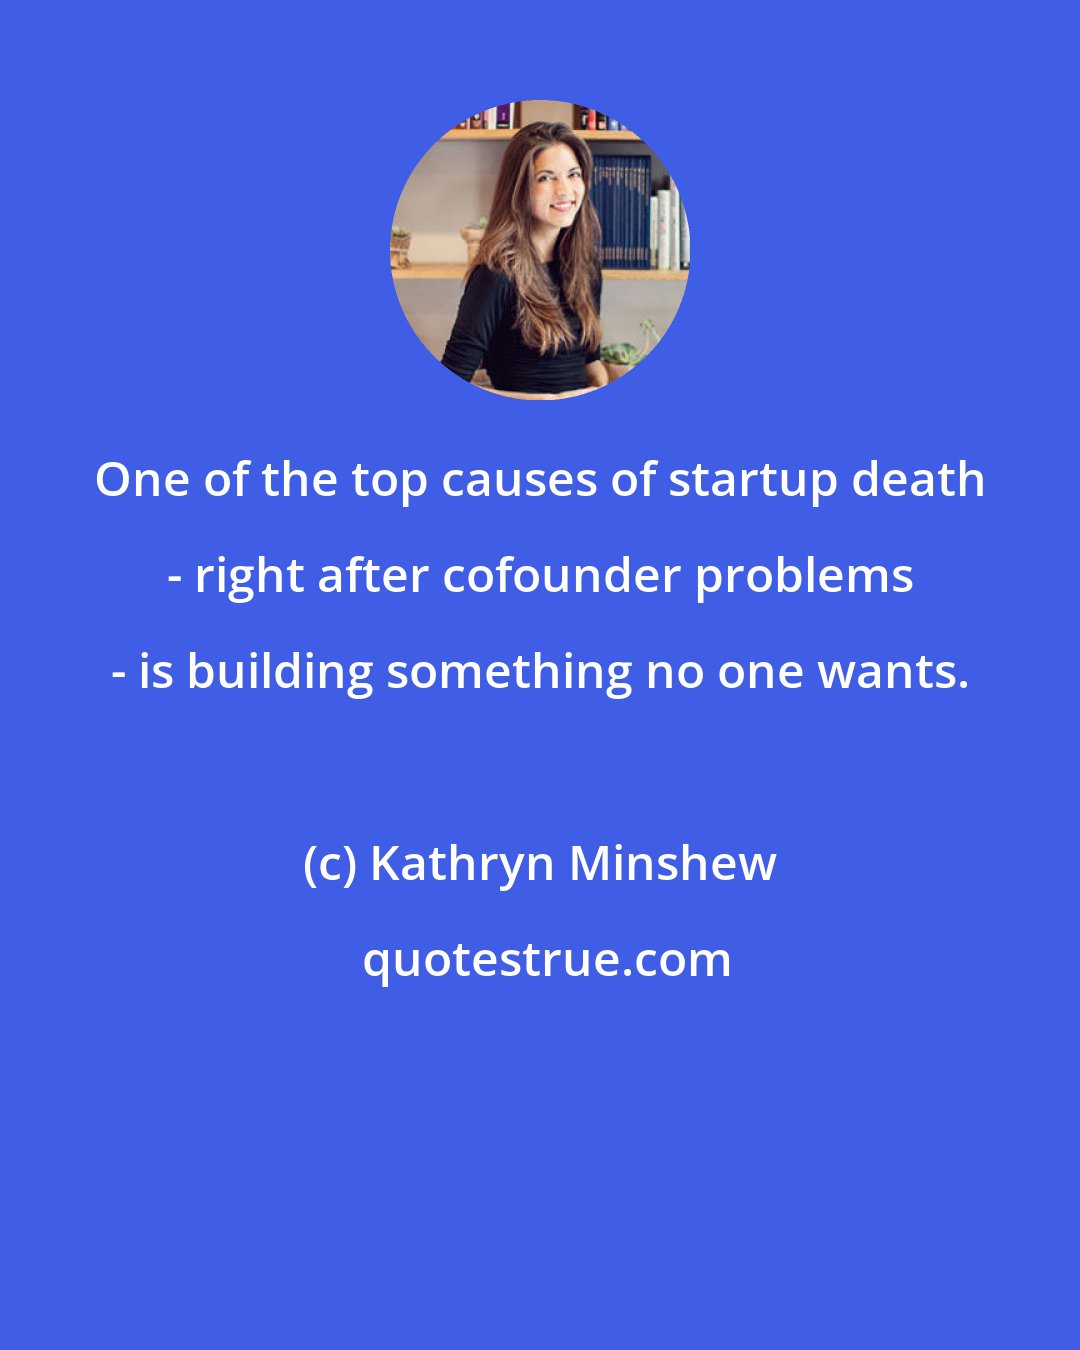 Kathryn Minshew: One of the top causes of startup death - right after cofounder problems - is building something no one wants.